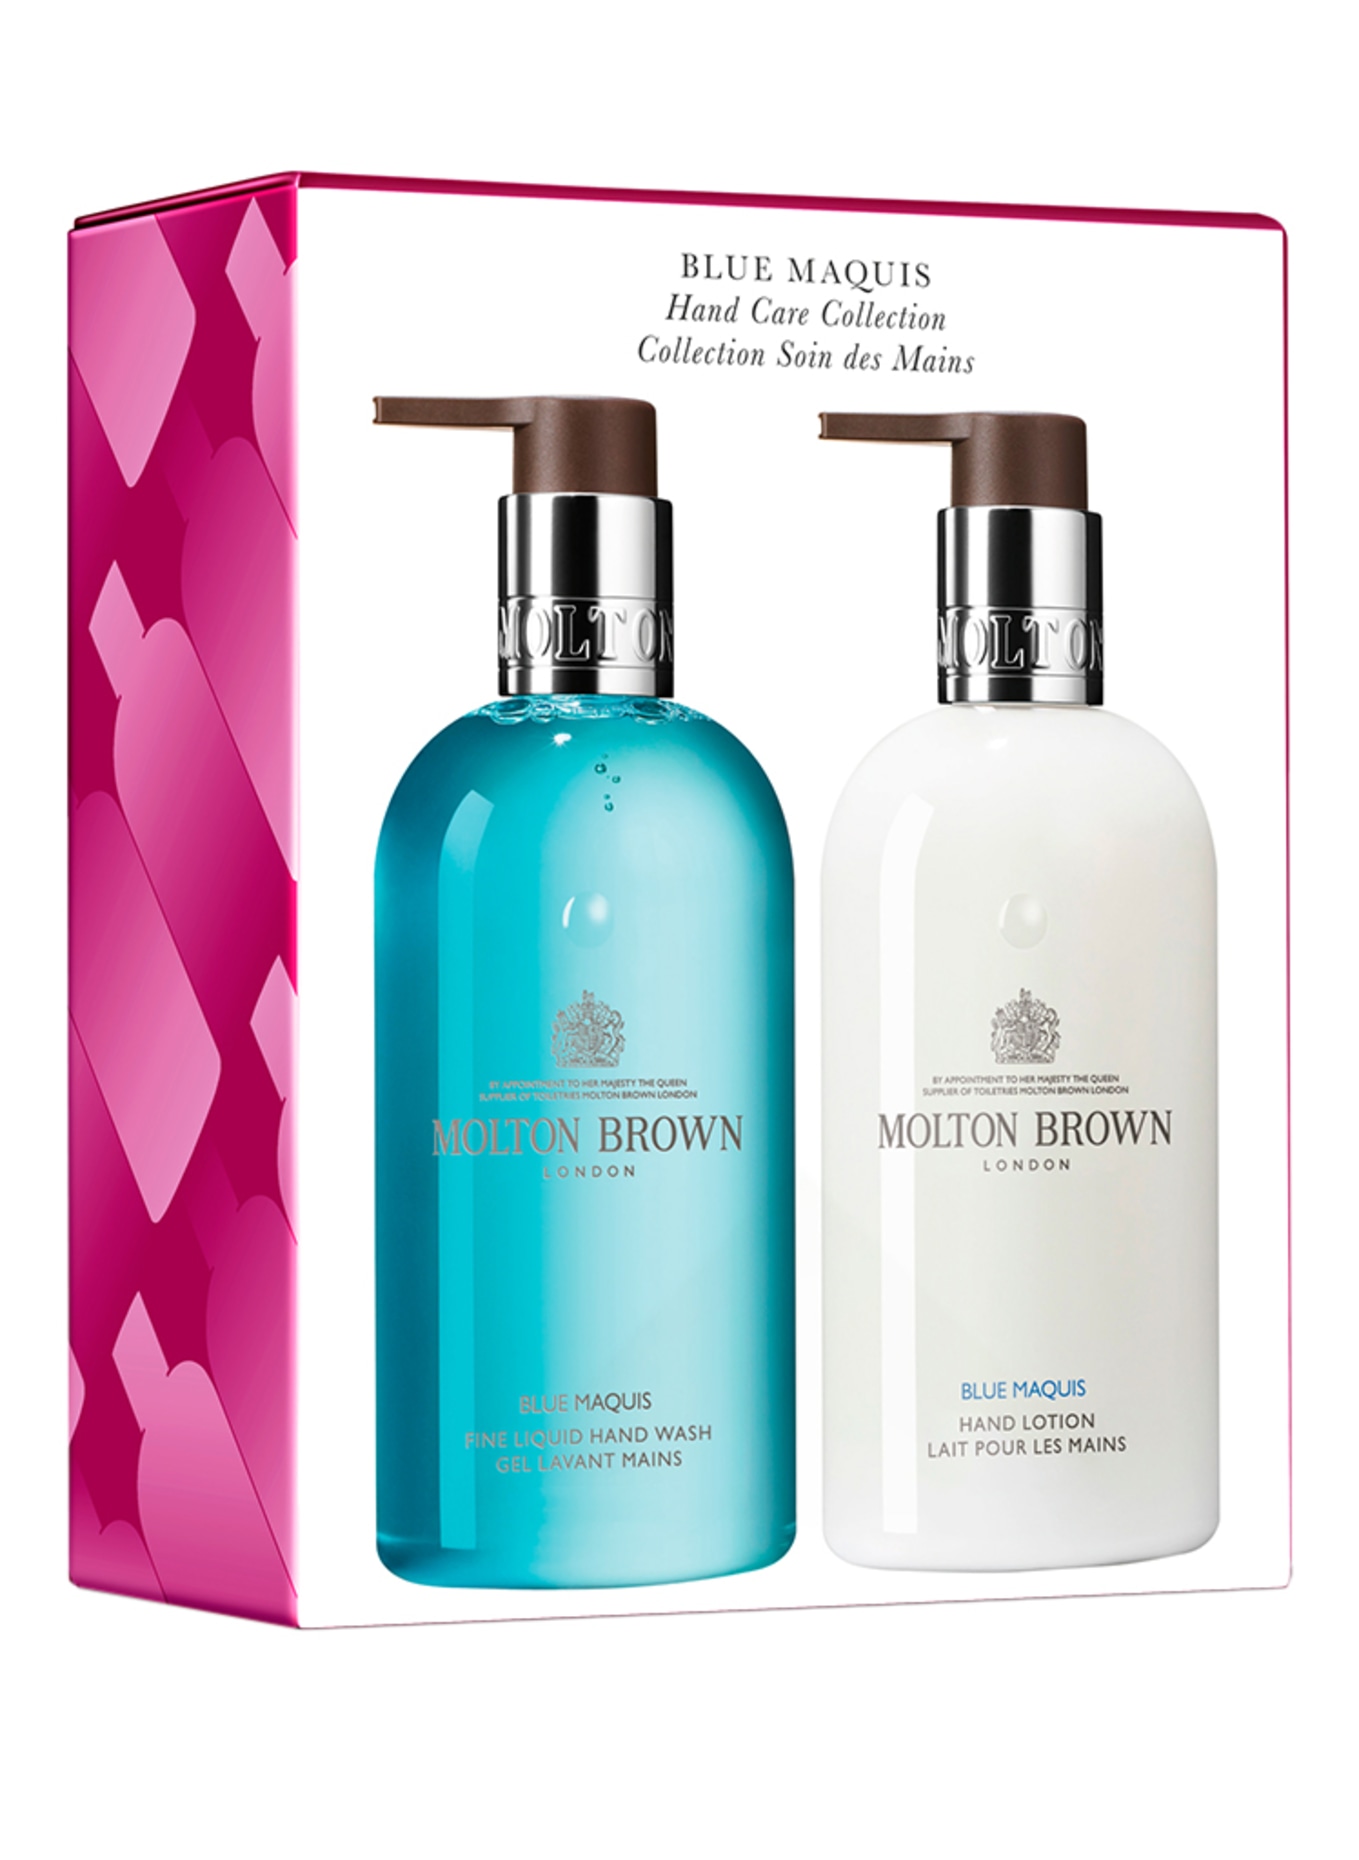 MOLTON BROWN BLUE MAQUIS HAND CARE COLLECTION (Obrazek 1)